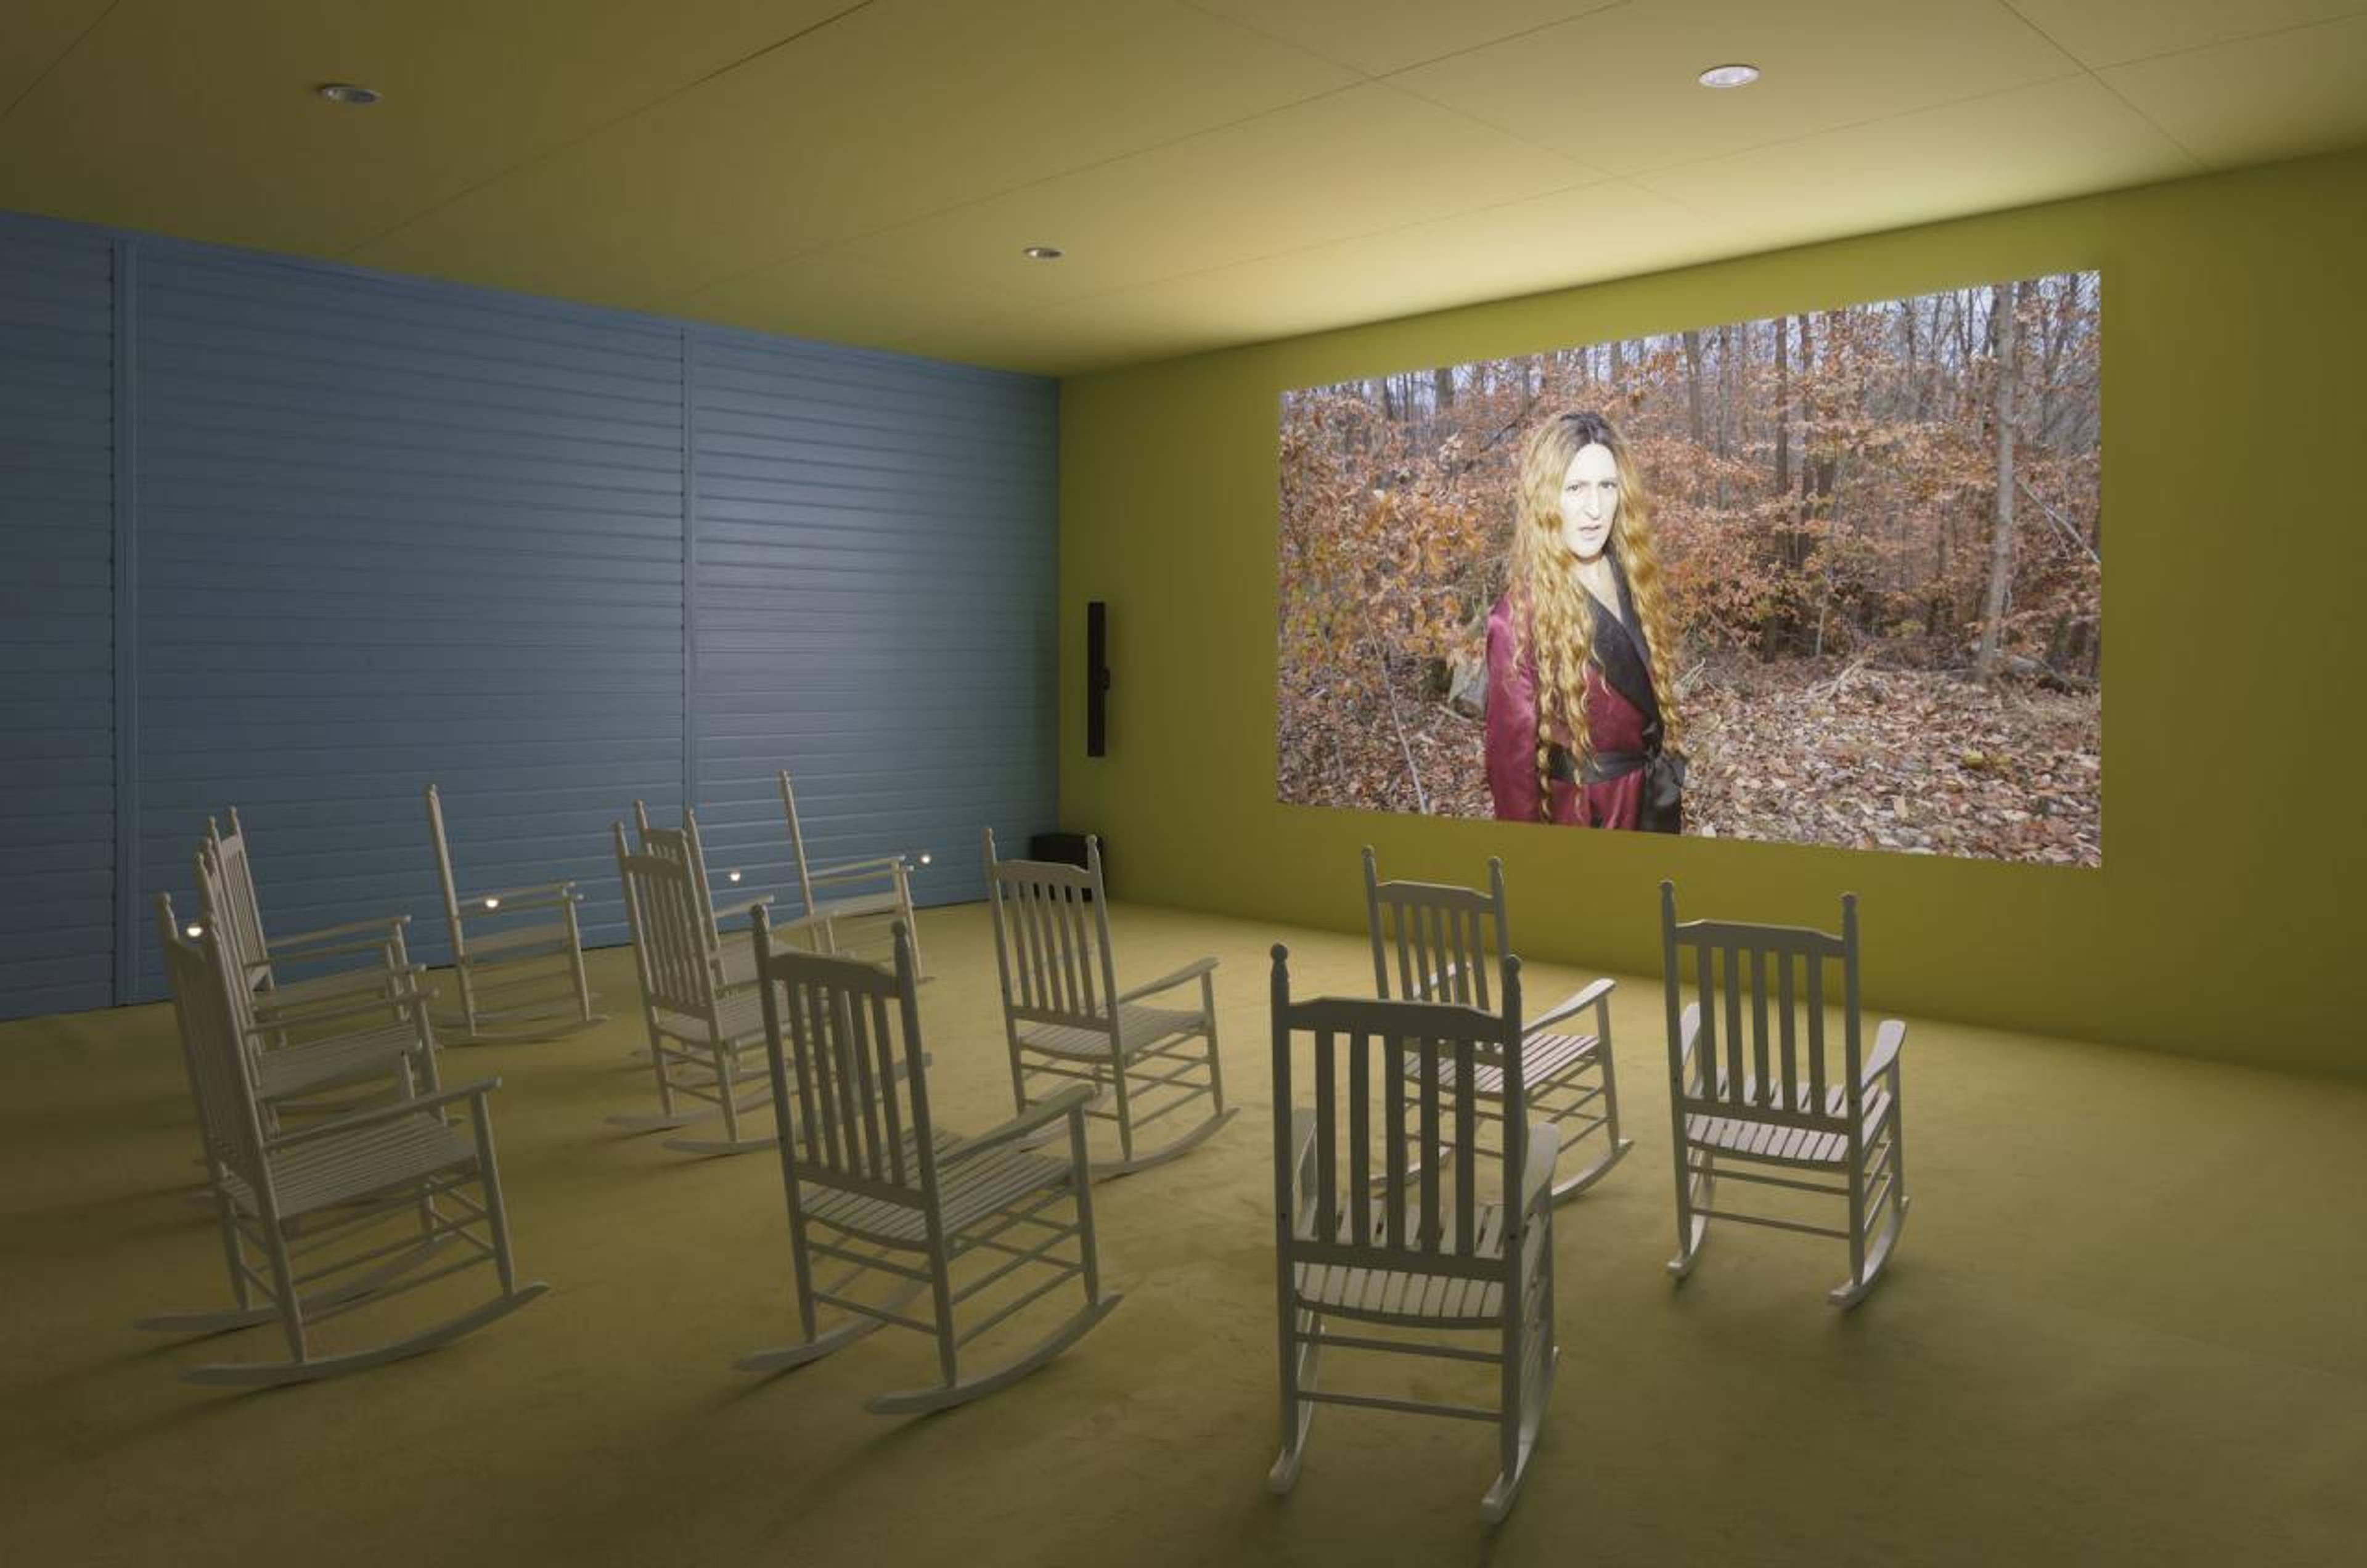 Exhibition view of &ldquo;Lizzie Fitch | Ryan Trecartin: Whether Line&rdquo;, Fondazione Prada, 2019 Photo Andrea Rossetti, Courtesy Fondazione Prada Lizzie Fitch | Ryan Trecartin Plot Front, 2019 4K video, color, sound, 1hr 45min approx. Wood, sheet metal, carpet, perforated metal acoustical panels, drywall, paint, PVC siding, bituminous sheath, rockers, lights, ambient sound